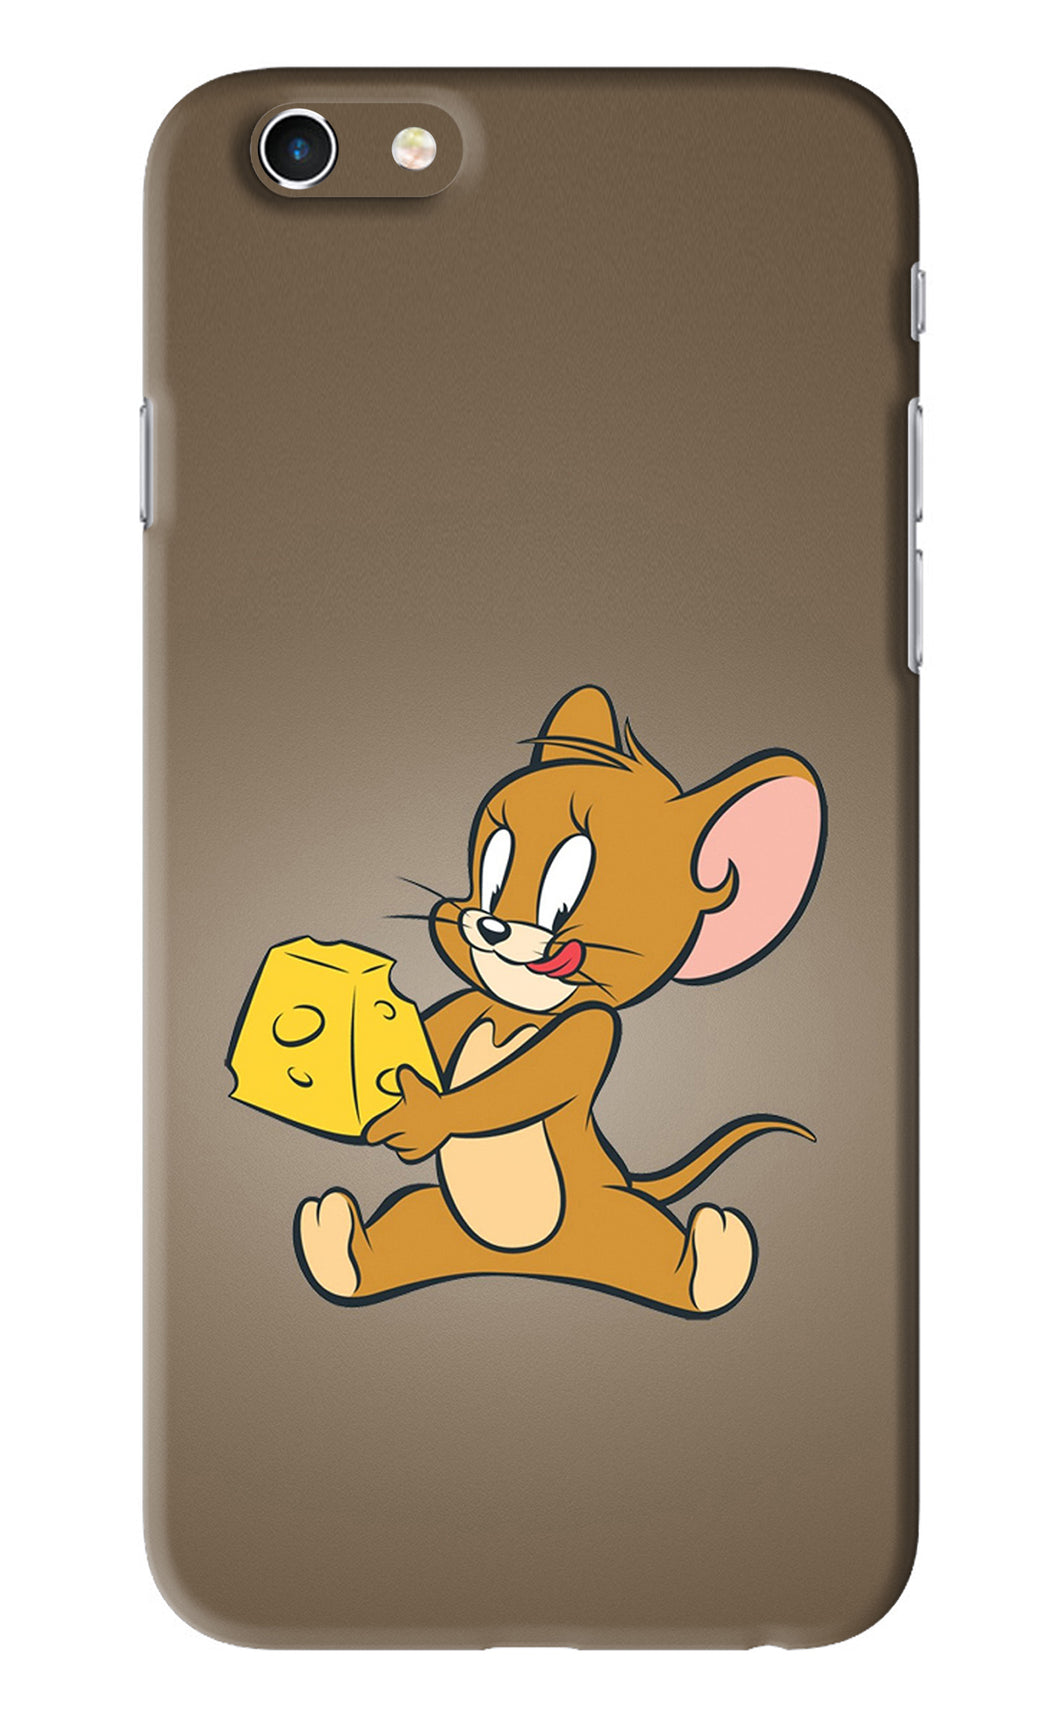 Jerry iPhone 6 Back Skin Wrap